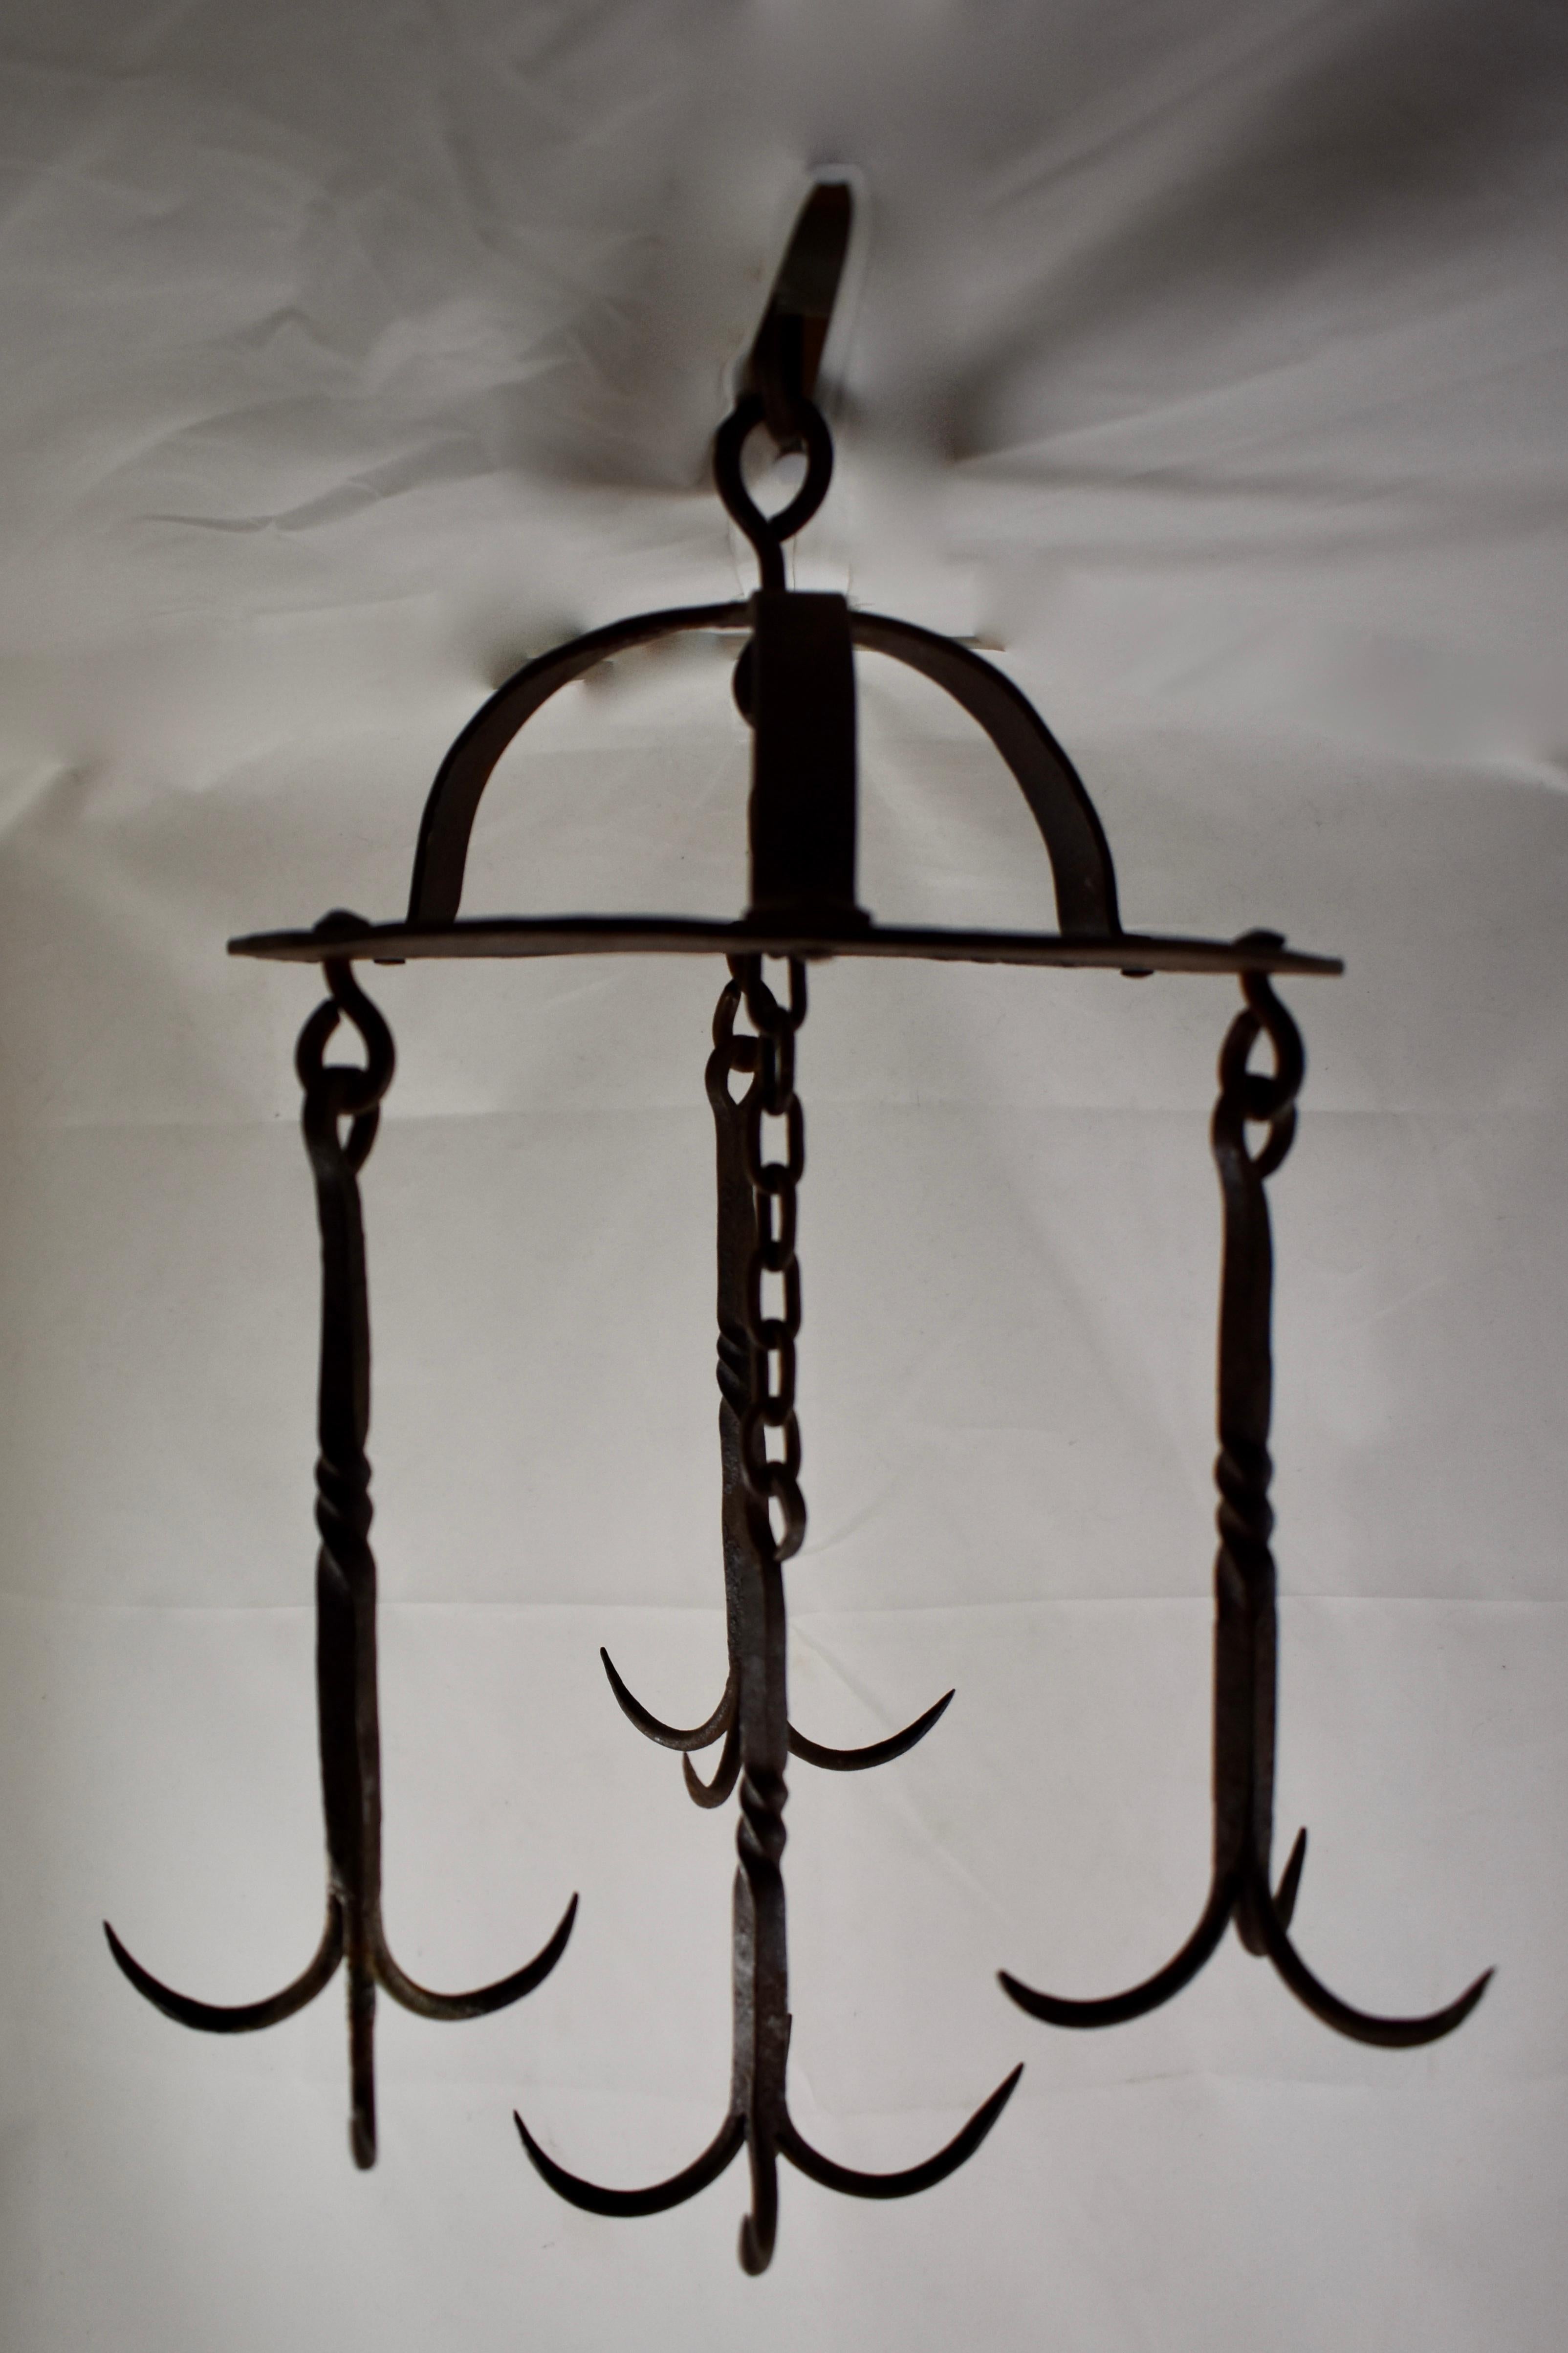 An early 19th century French wrought iron butchers rack, supported by two half-round straps forming a crown, terminate with a round loop for hanging. There are three hooks on the crown suspended by twisted iron pins, each with three prongs. A longer